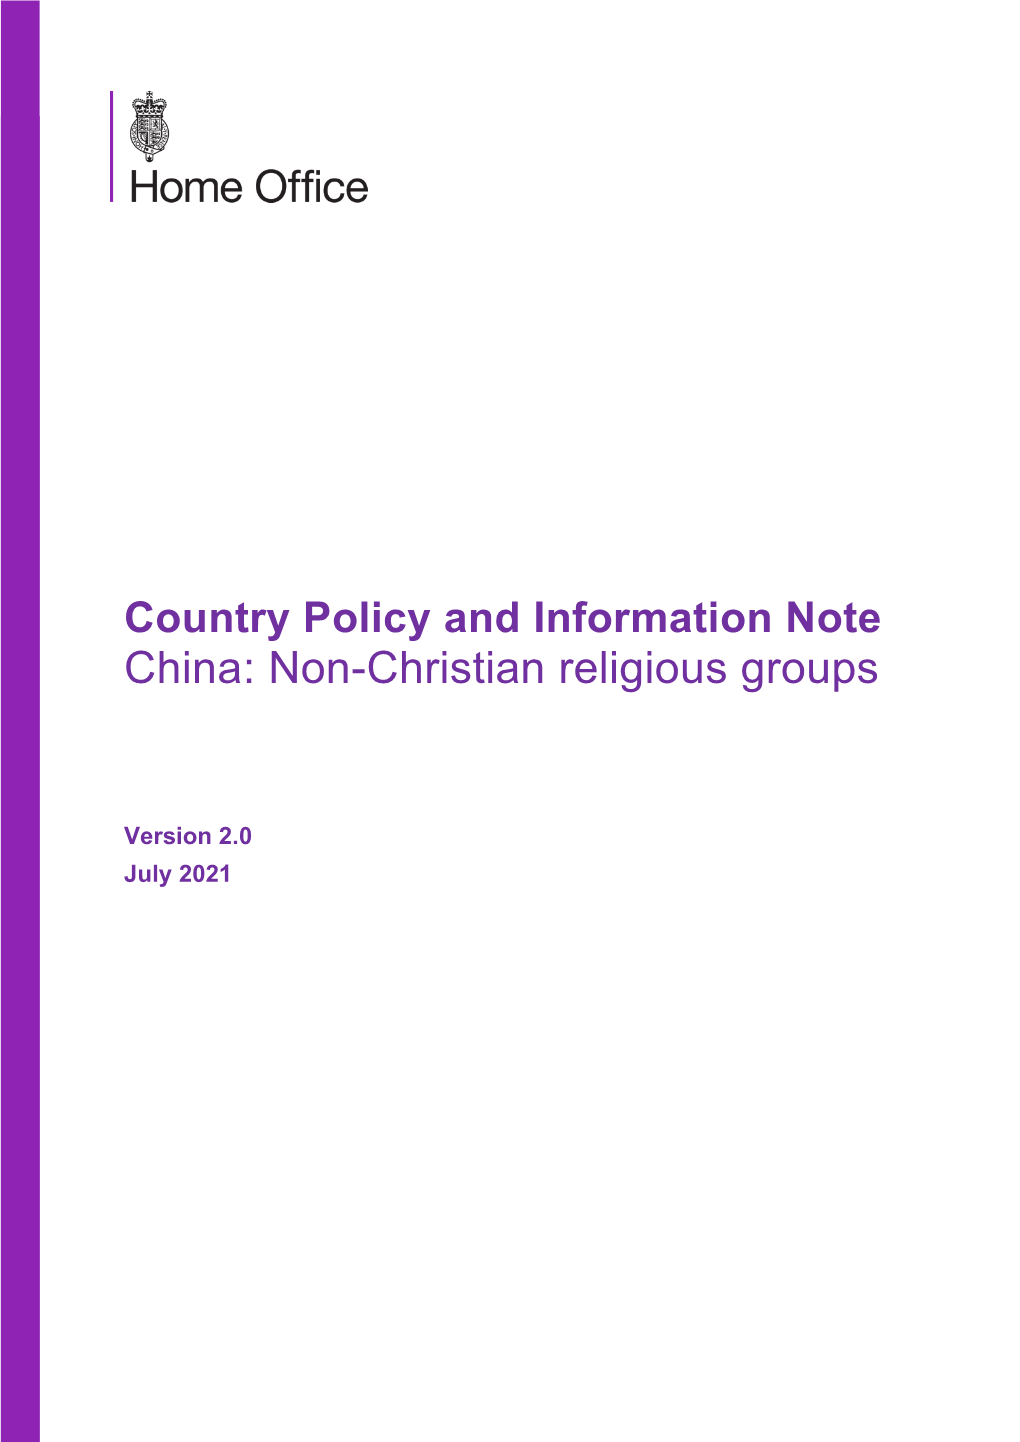 China: Non-Christian Religious Groups, July 2021